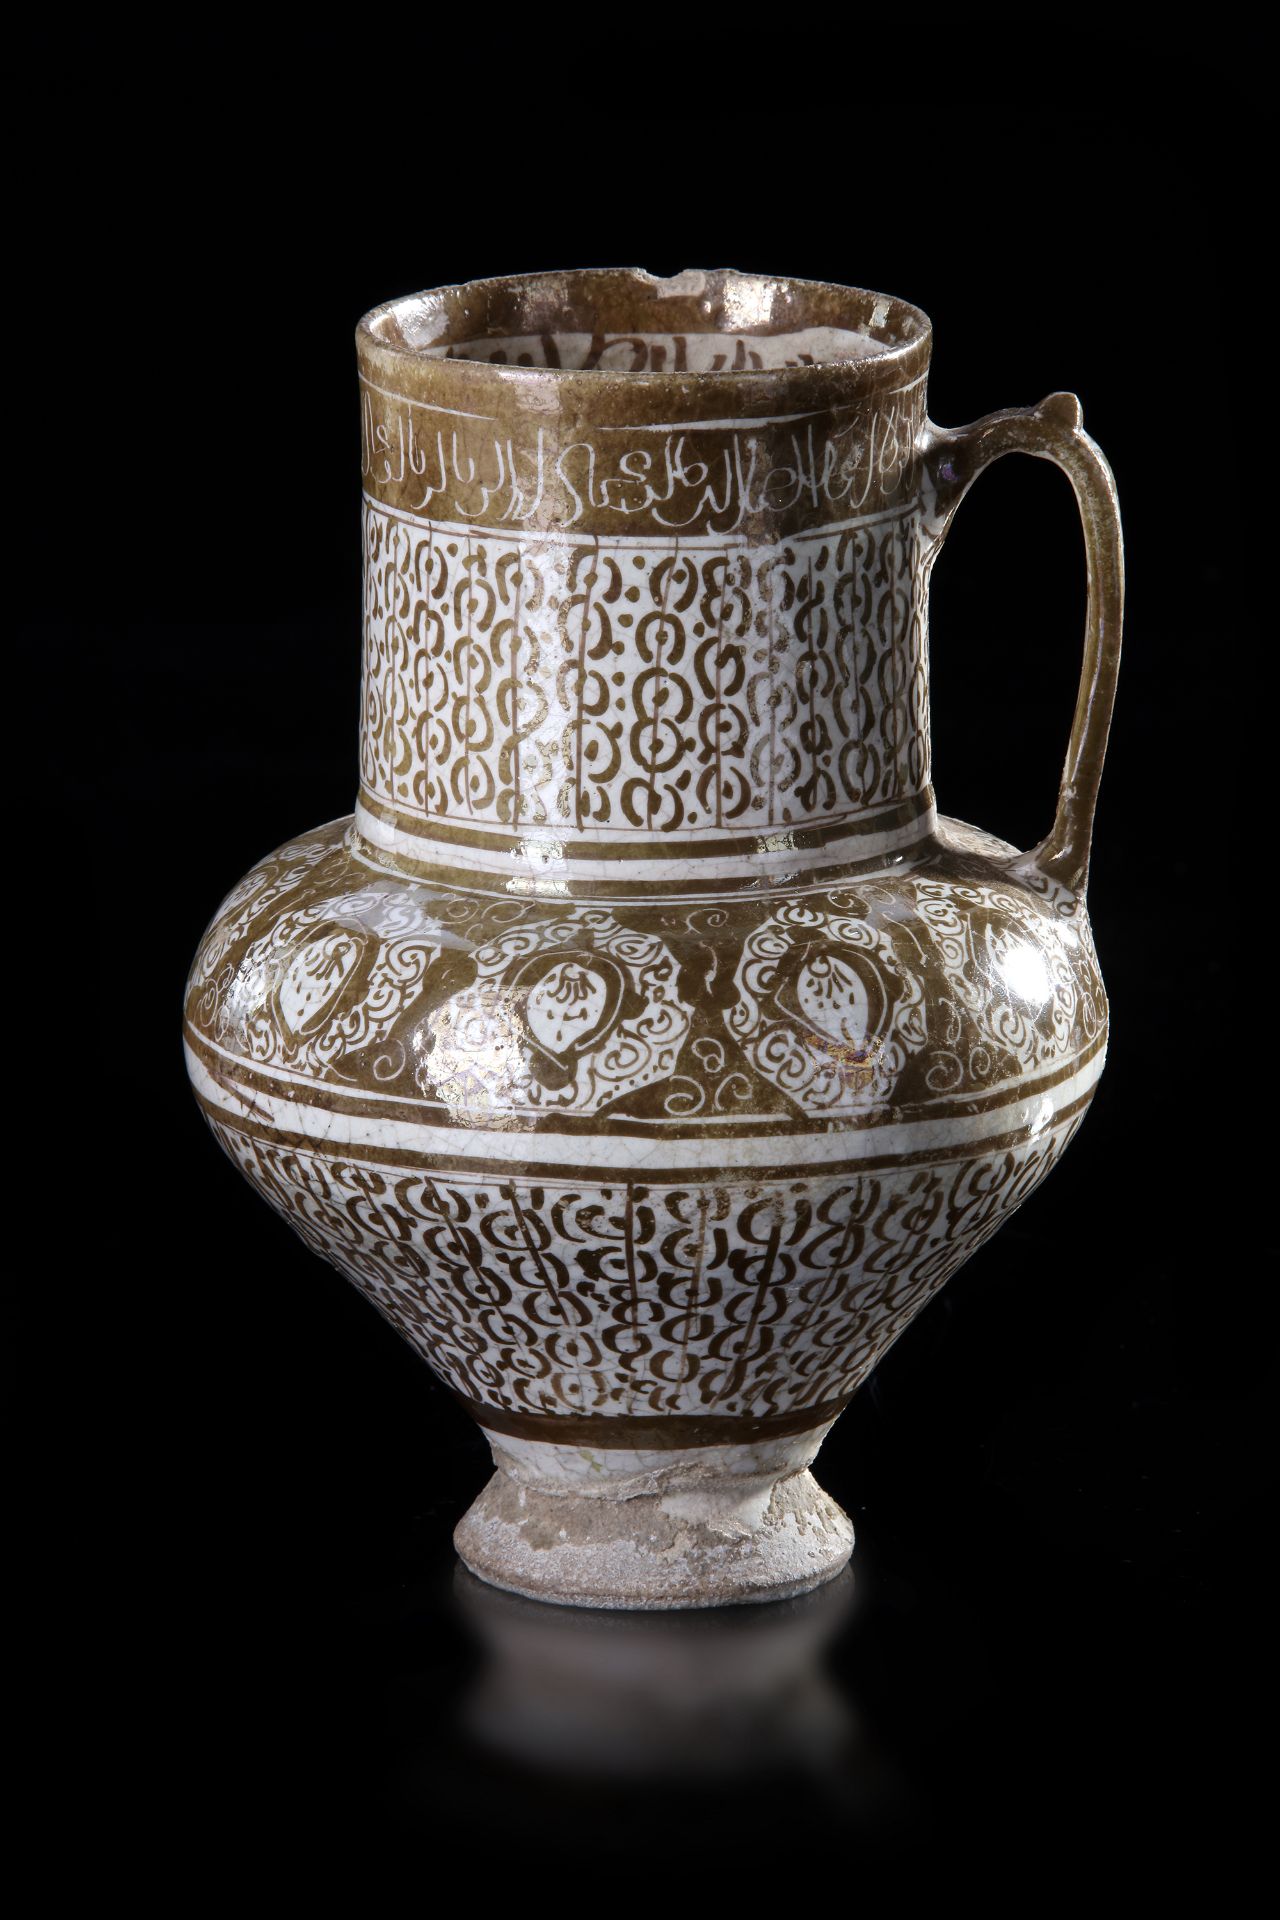 A KASHAN LUSTRE POTTERY JUG, PERSIA, 13TH CENTURY - Image 3 of 5